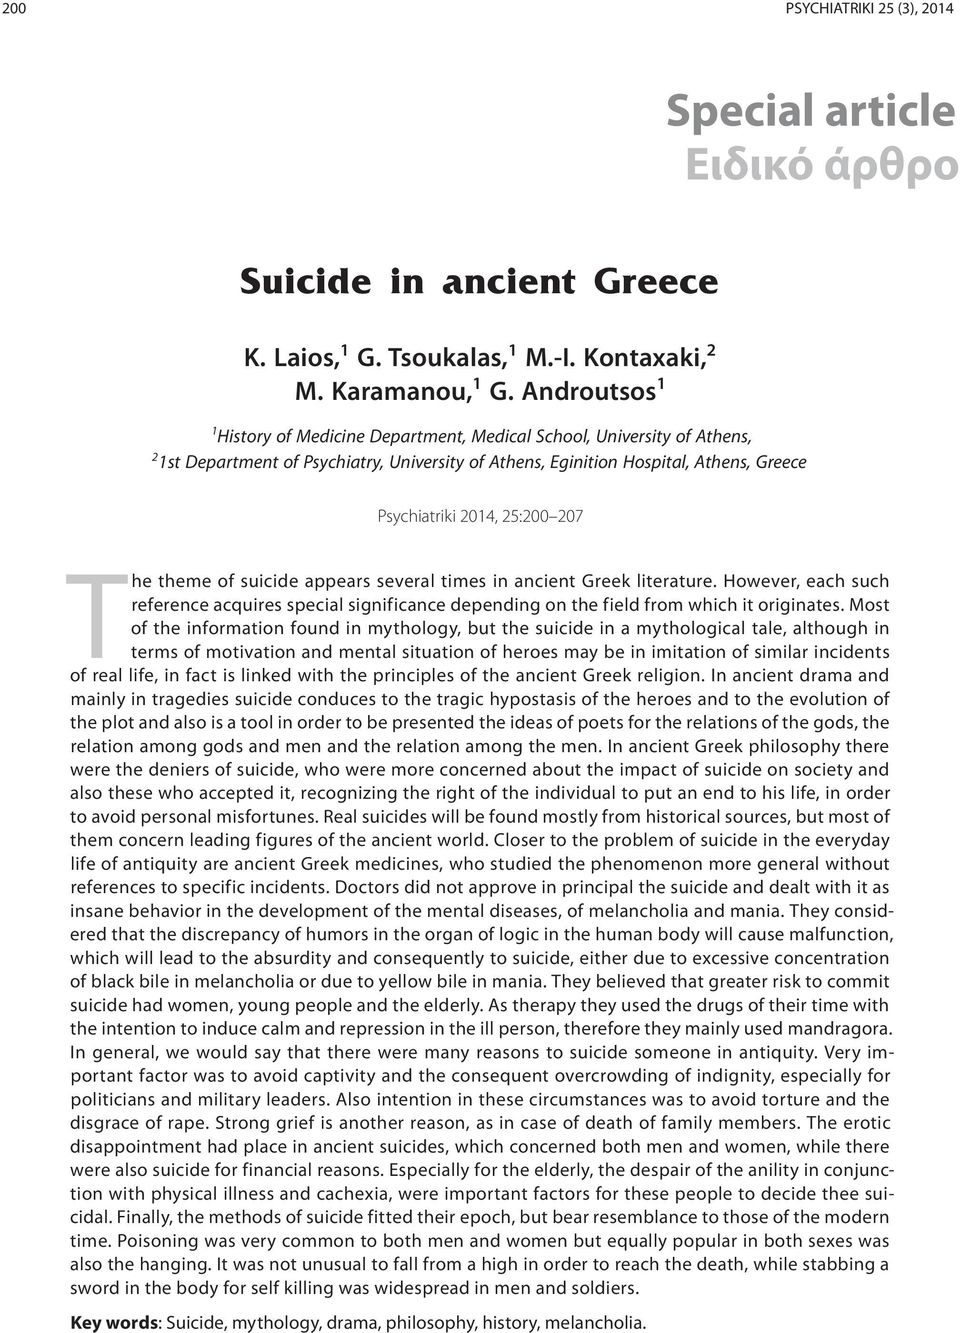 207 The theme of suicide appears several times in ancient Greek literature. However, each such reference acquires special significance depending on the field from which it originates.